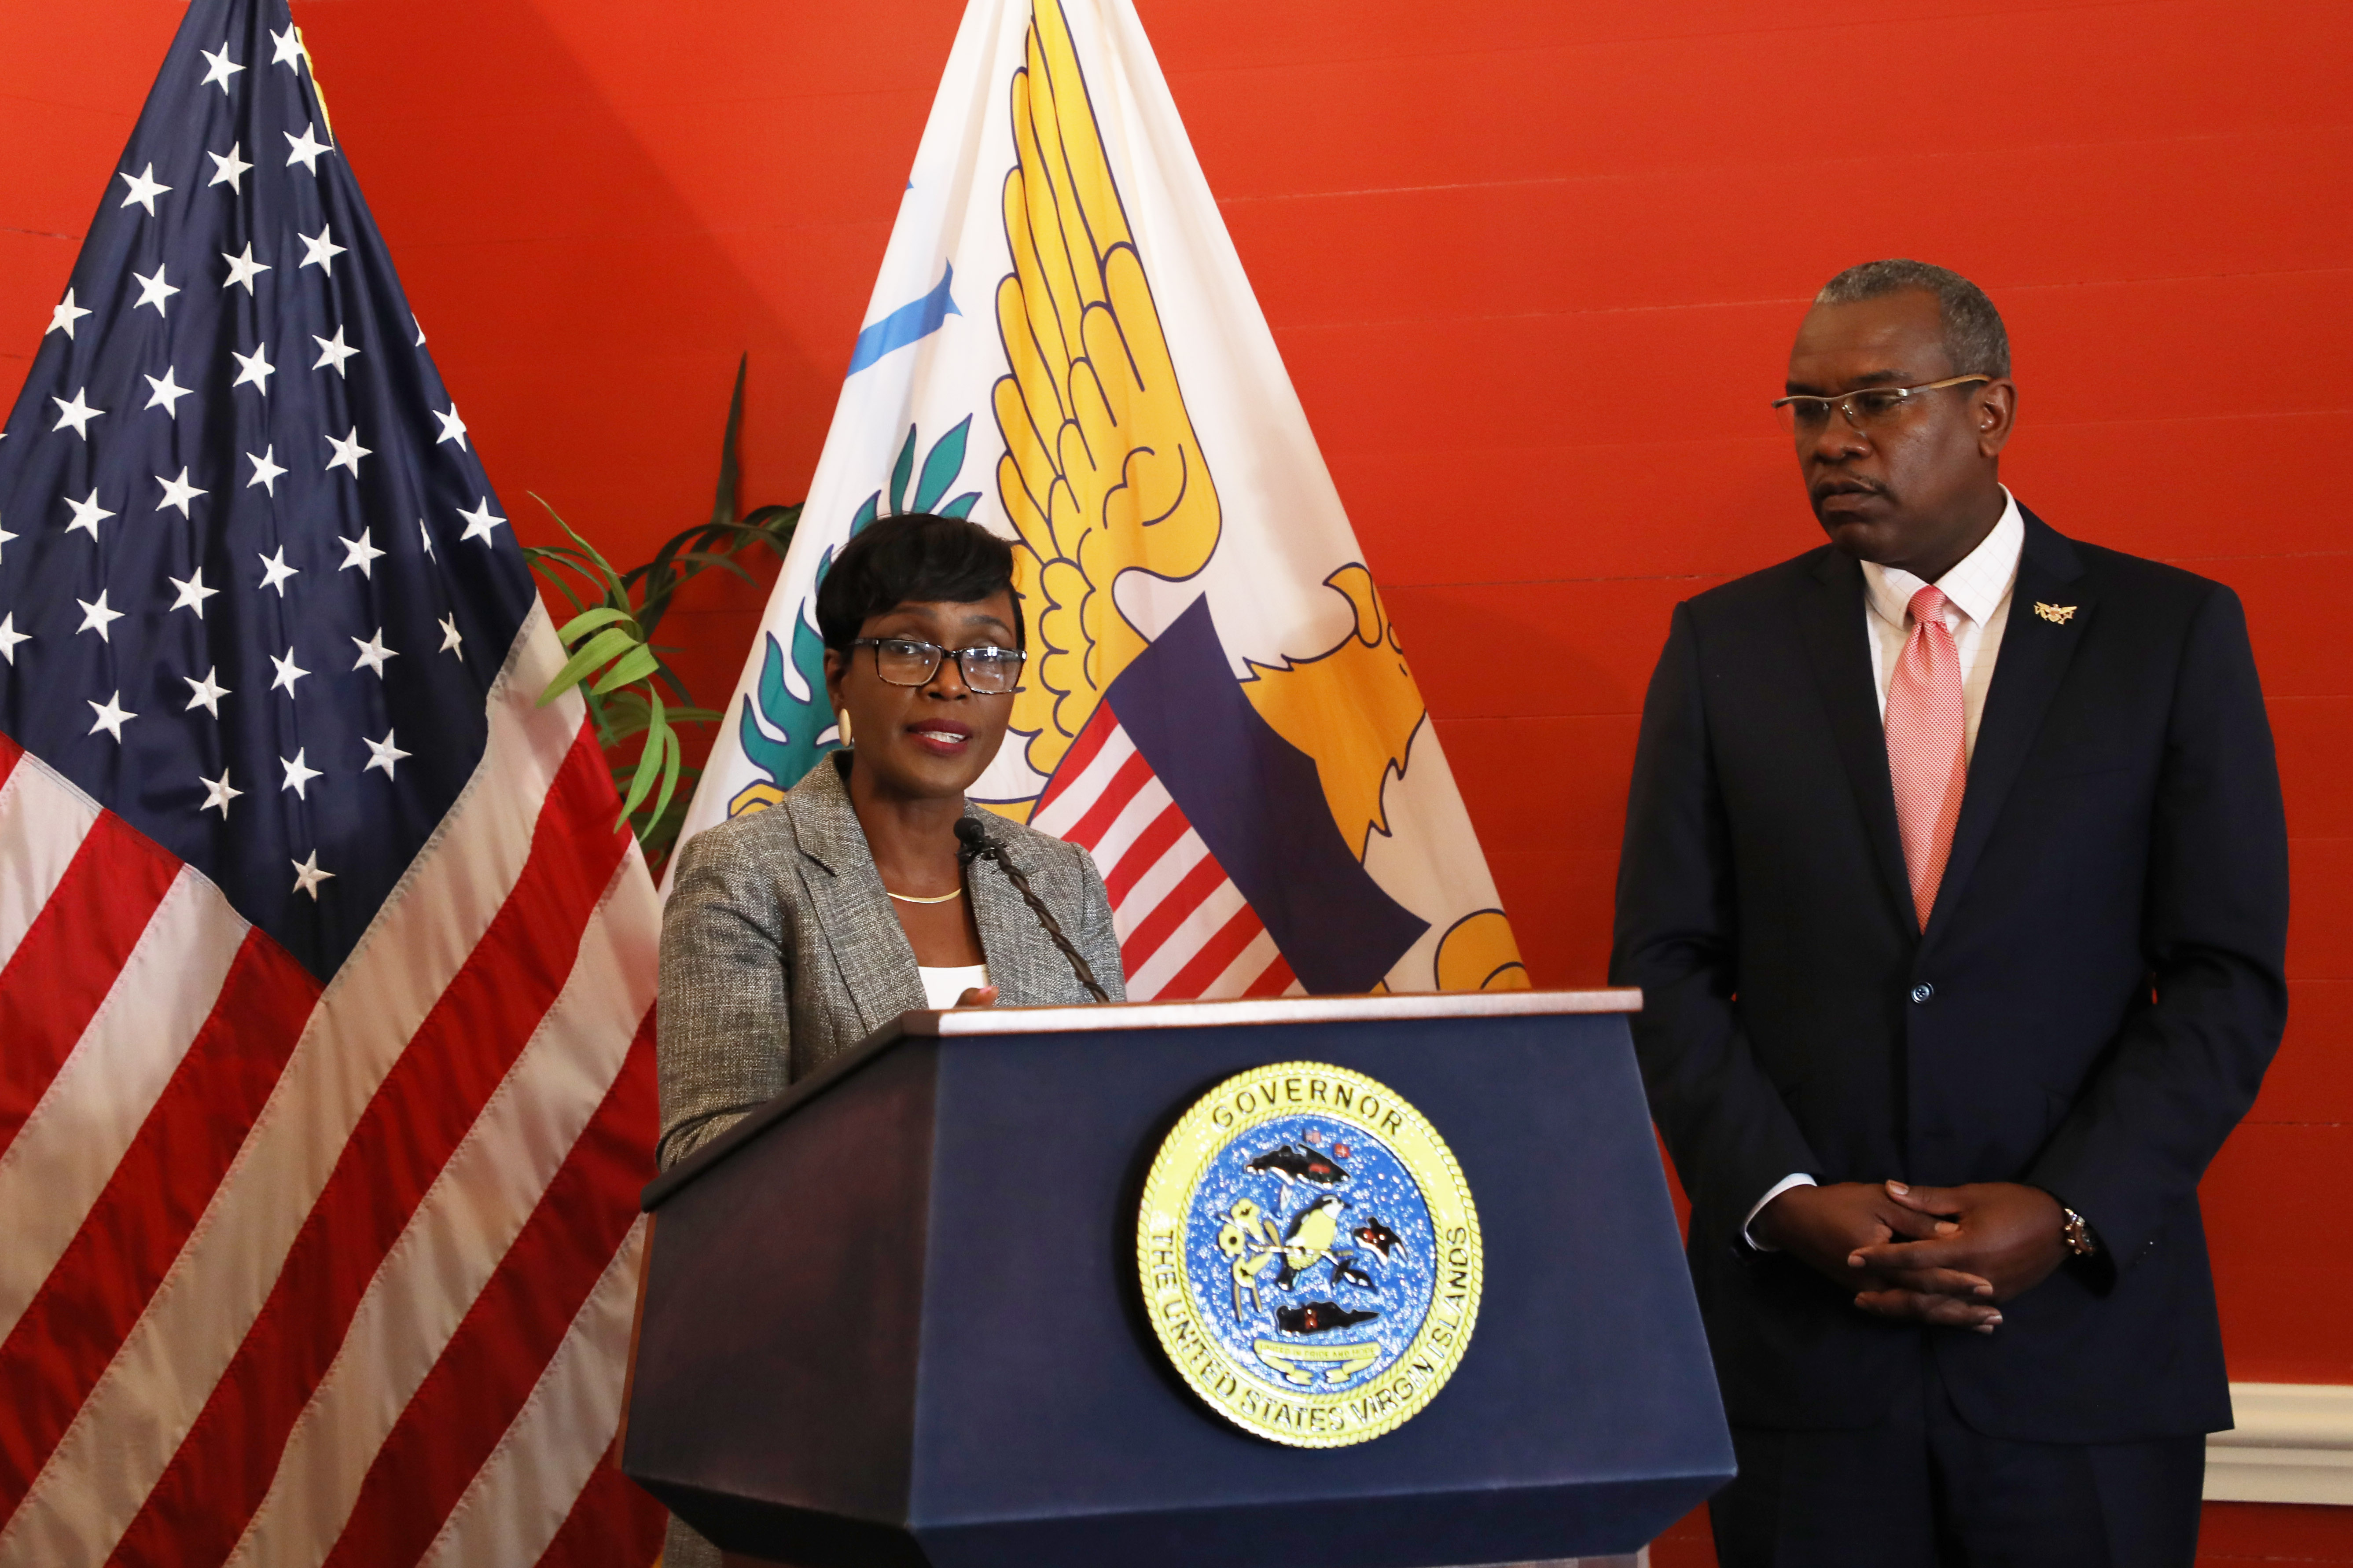 Gov. Bryan Names Attorney General, Proposes Six-Year Term for USVI Attorneys General